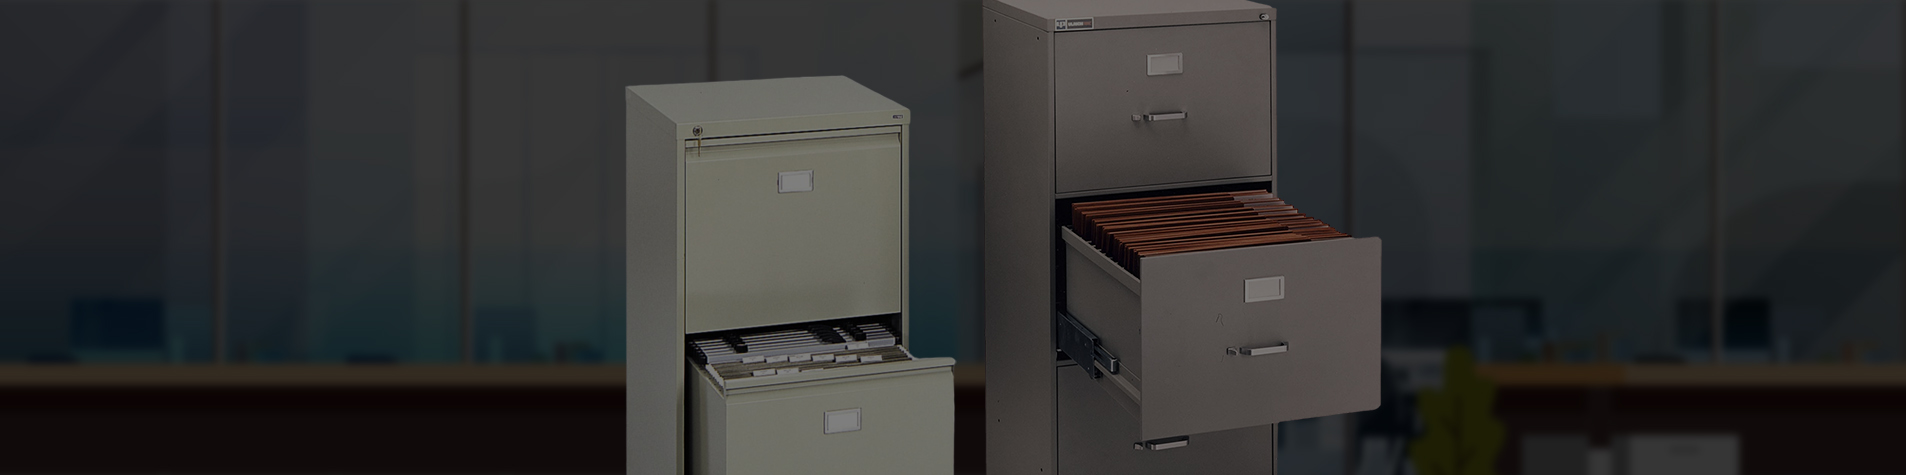 Quality Metal File Cabinets Lateral Filing Cabinets 3 Drawer File Cabinets Engineersupply